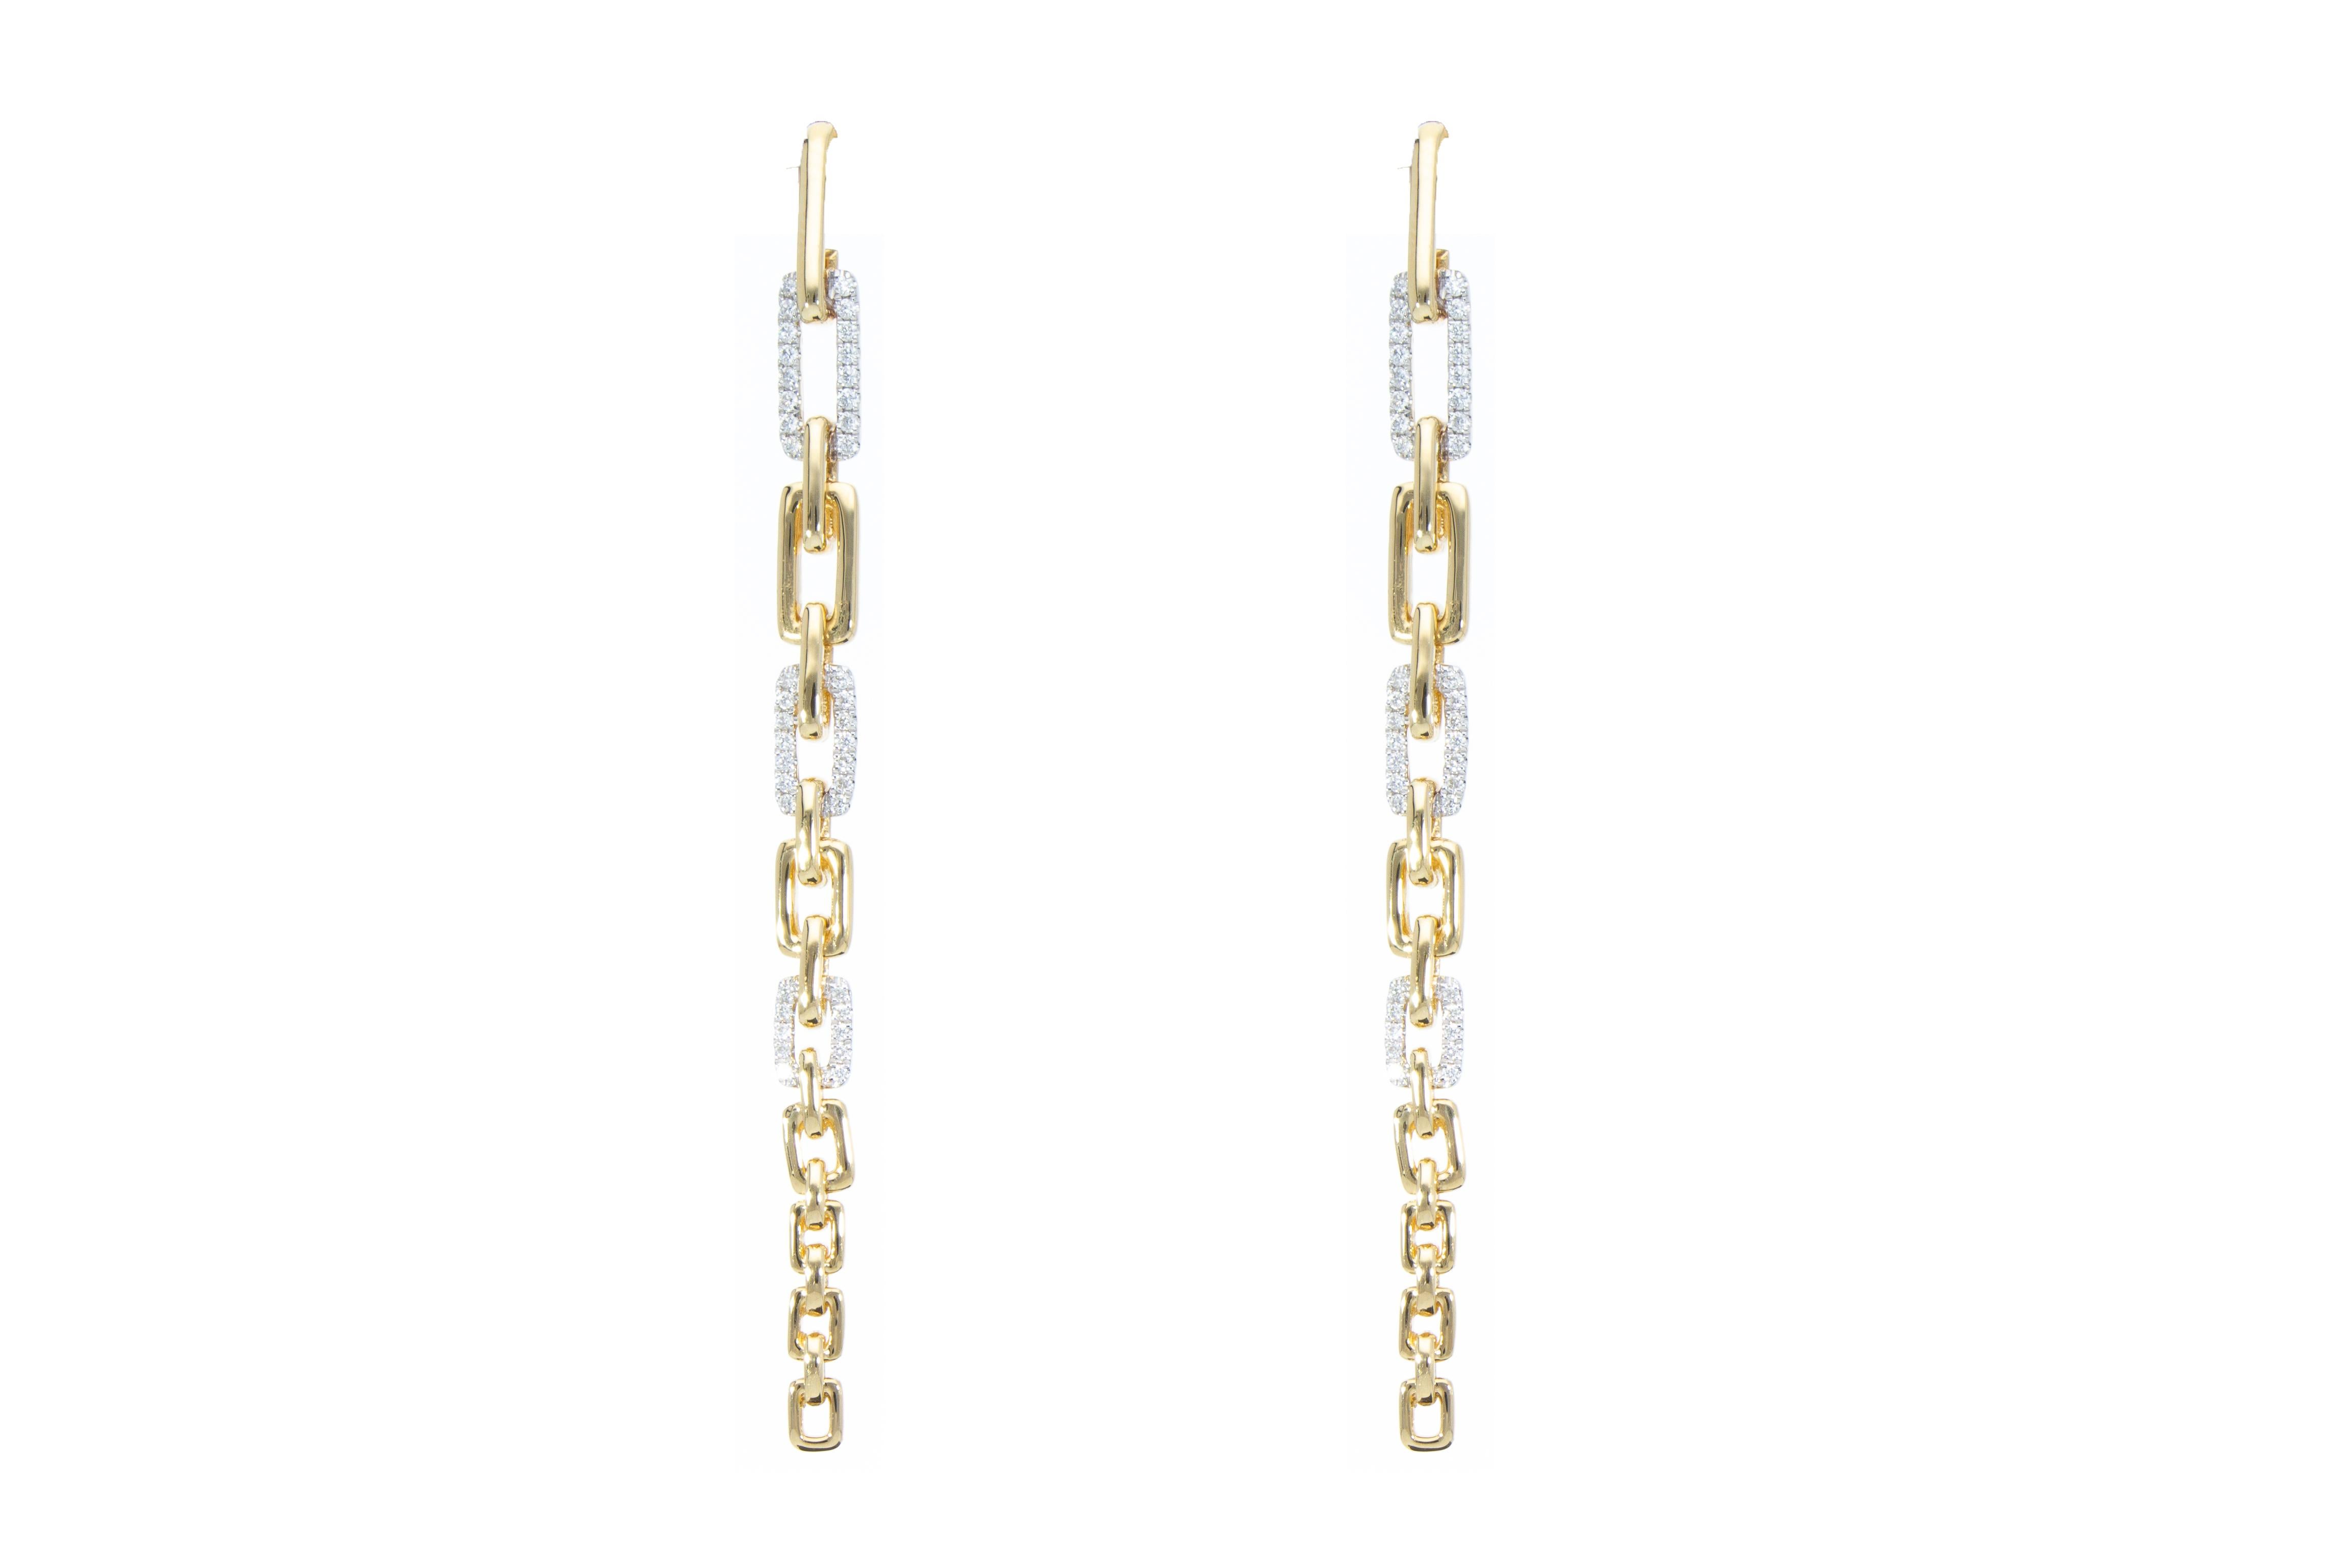 Diamonds Ct 0.35 Pendant Earrings with Rectangular Links 18k Gold Made in Italy For Sale 1